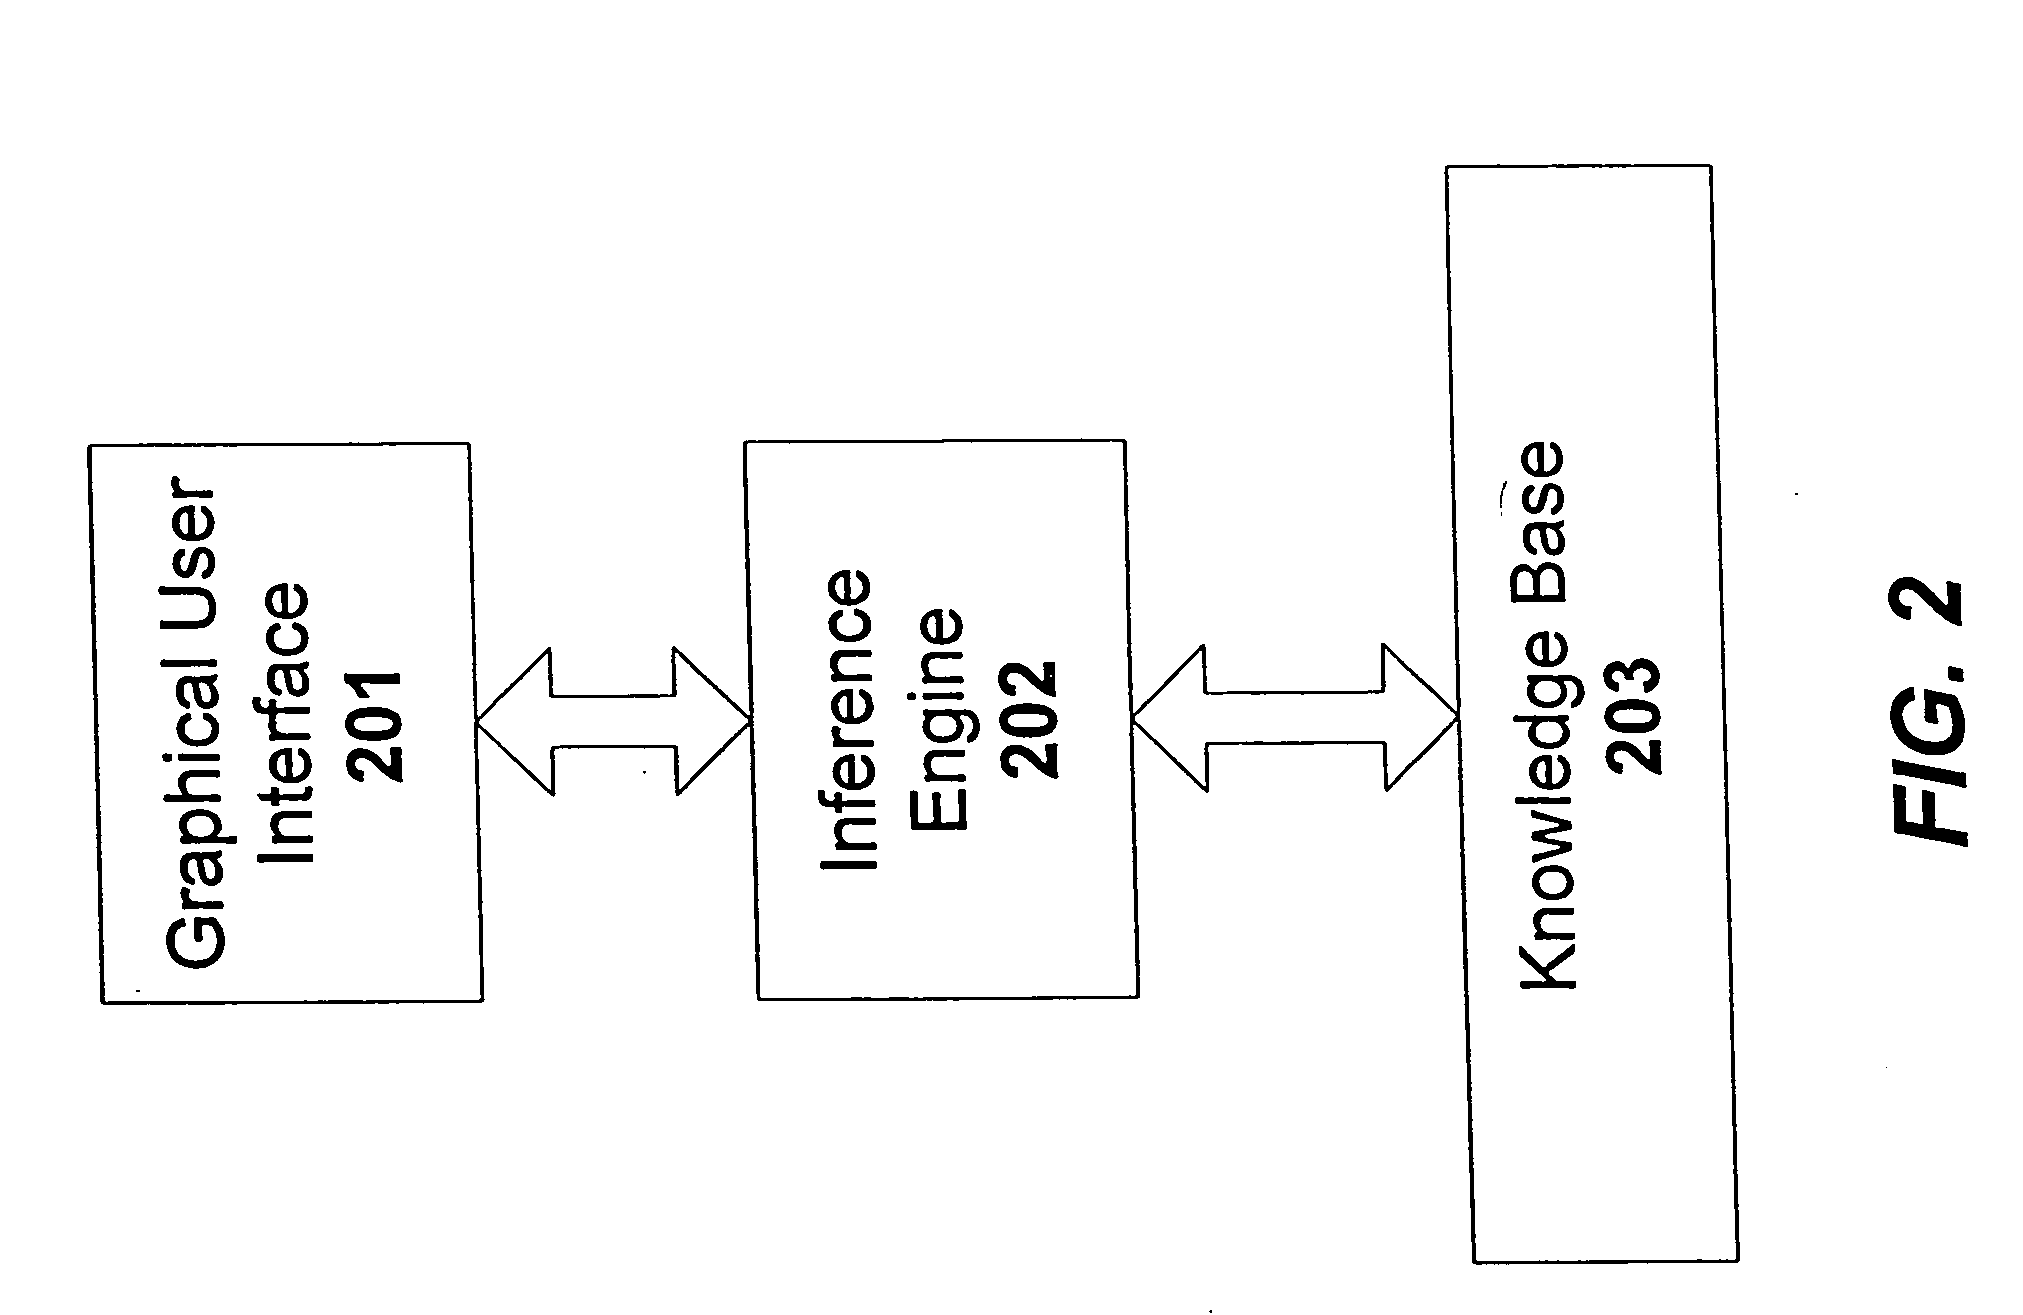 Method and system for providing an intelligent goal-oriented user interface to data and services